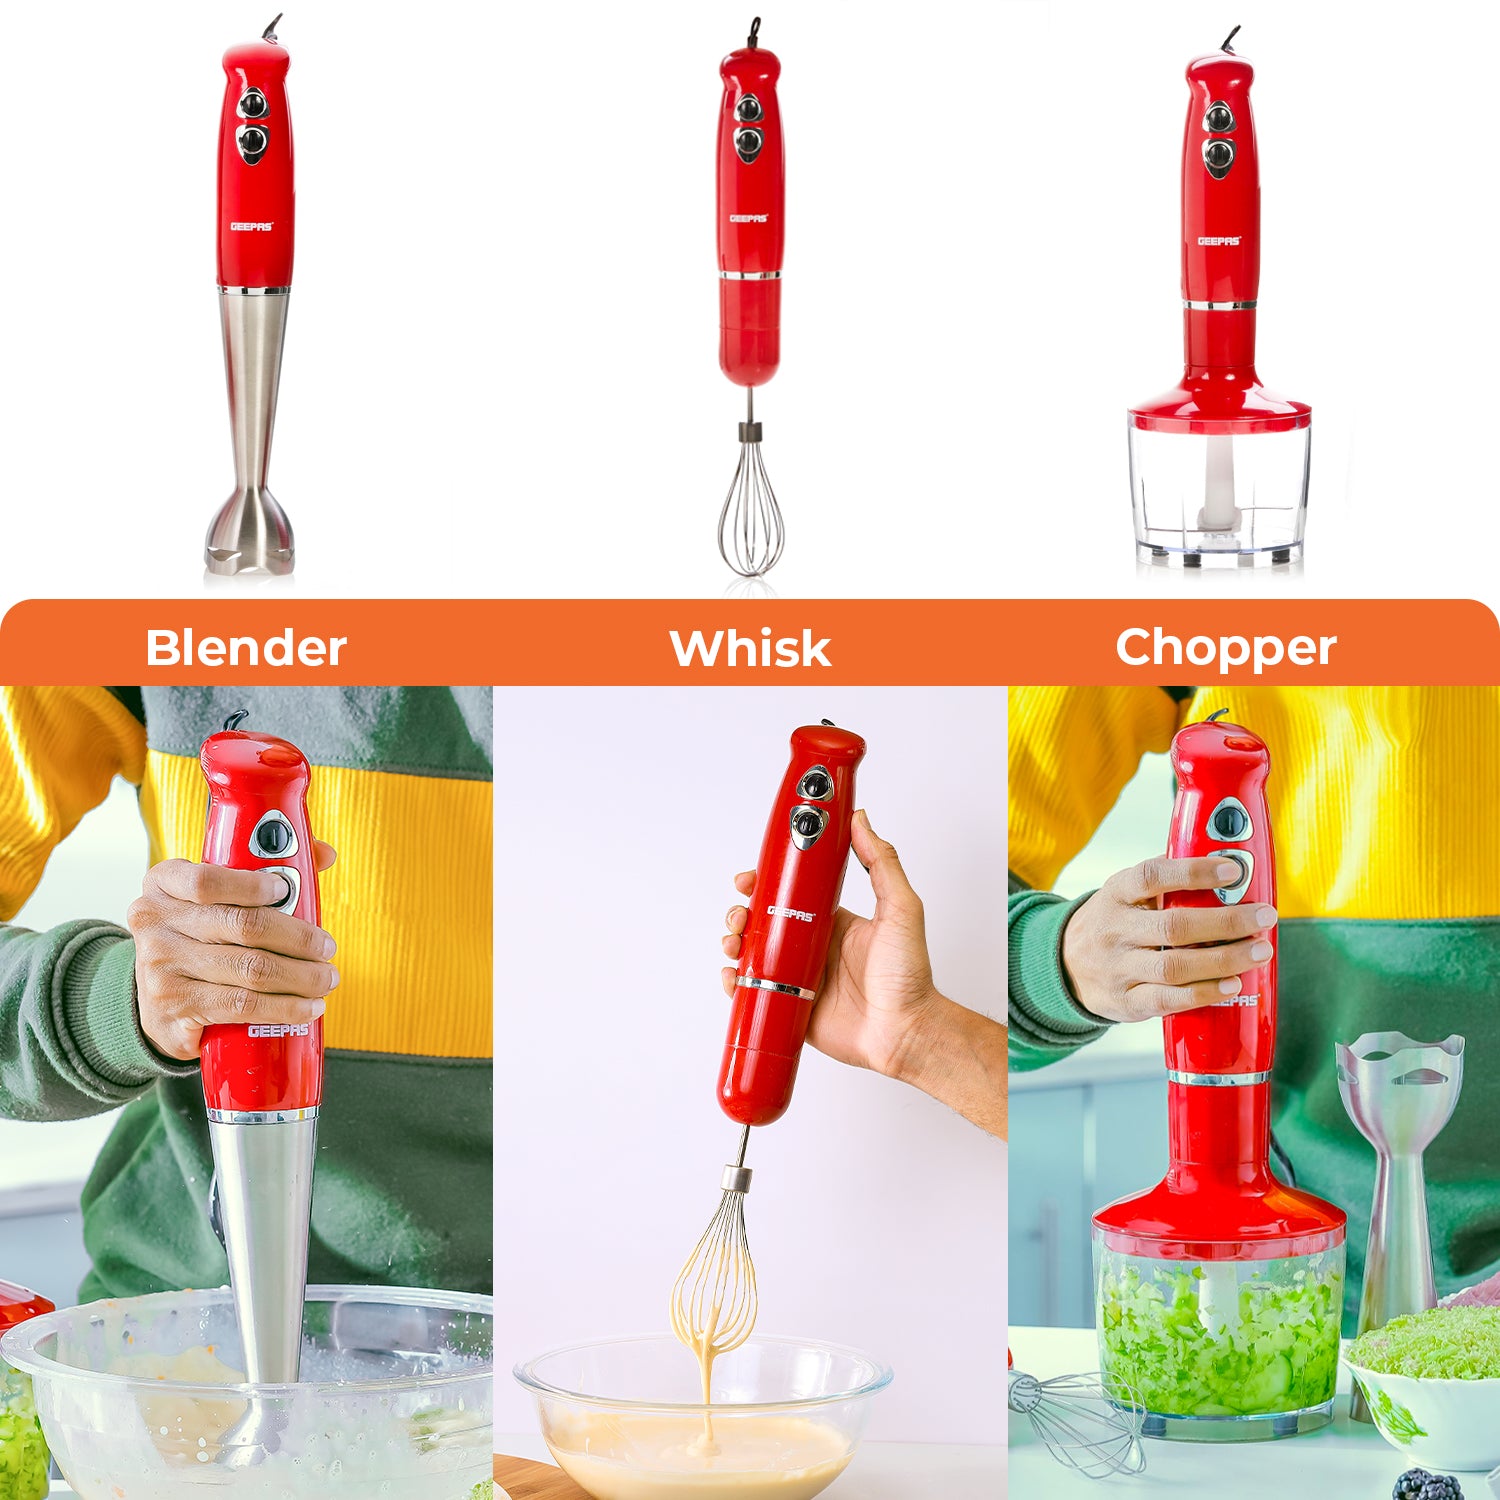 3-In-1 Stick Hand Blender and Food Processor